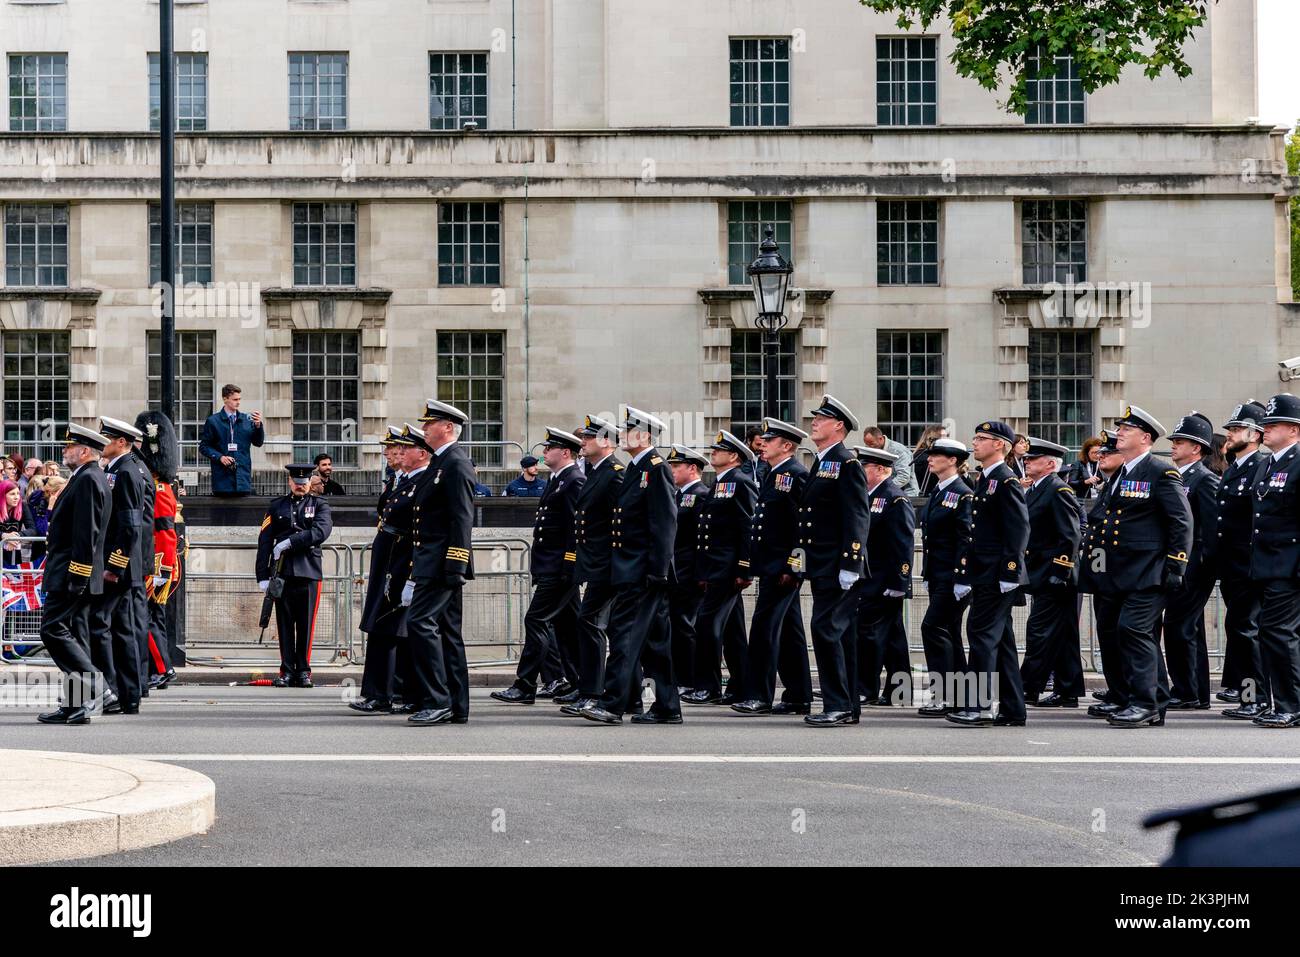 Representatives Of The Civilian Services Walk Behind The Coffin Of Queen Elizabeth II As The Funeral Procession Travels Up Whitehall, London, UK. Stock Photo